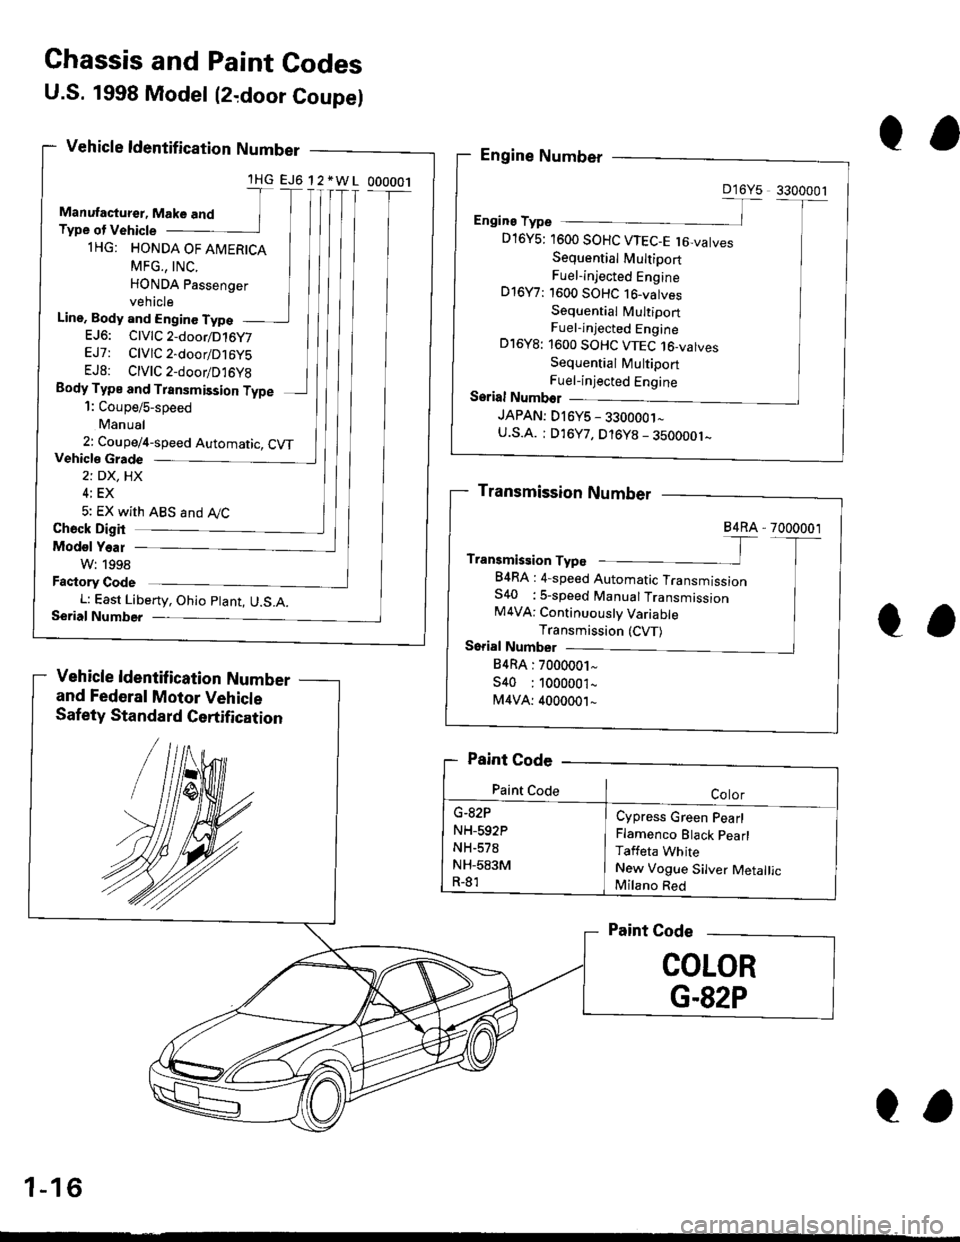 HONDA CIVIC 1999 6.G User Guide Ghassis and Paint Codes
U.S. 1998 Model (2,door Coupel
Vehicle ldentif ication Number
and Federal Motor Vehicle
Safety Standard Certification
lHG EJ6 12*WL 000001
Line, Body and Enginc TypeEJ6: ClVlC2